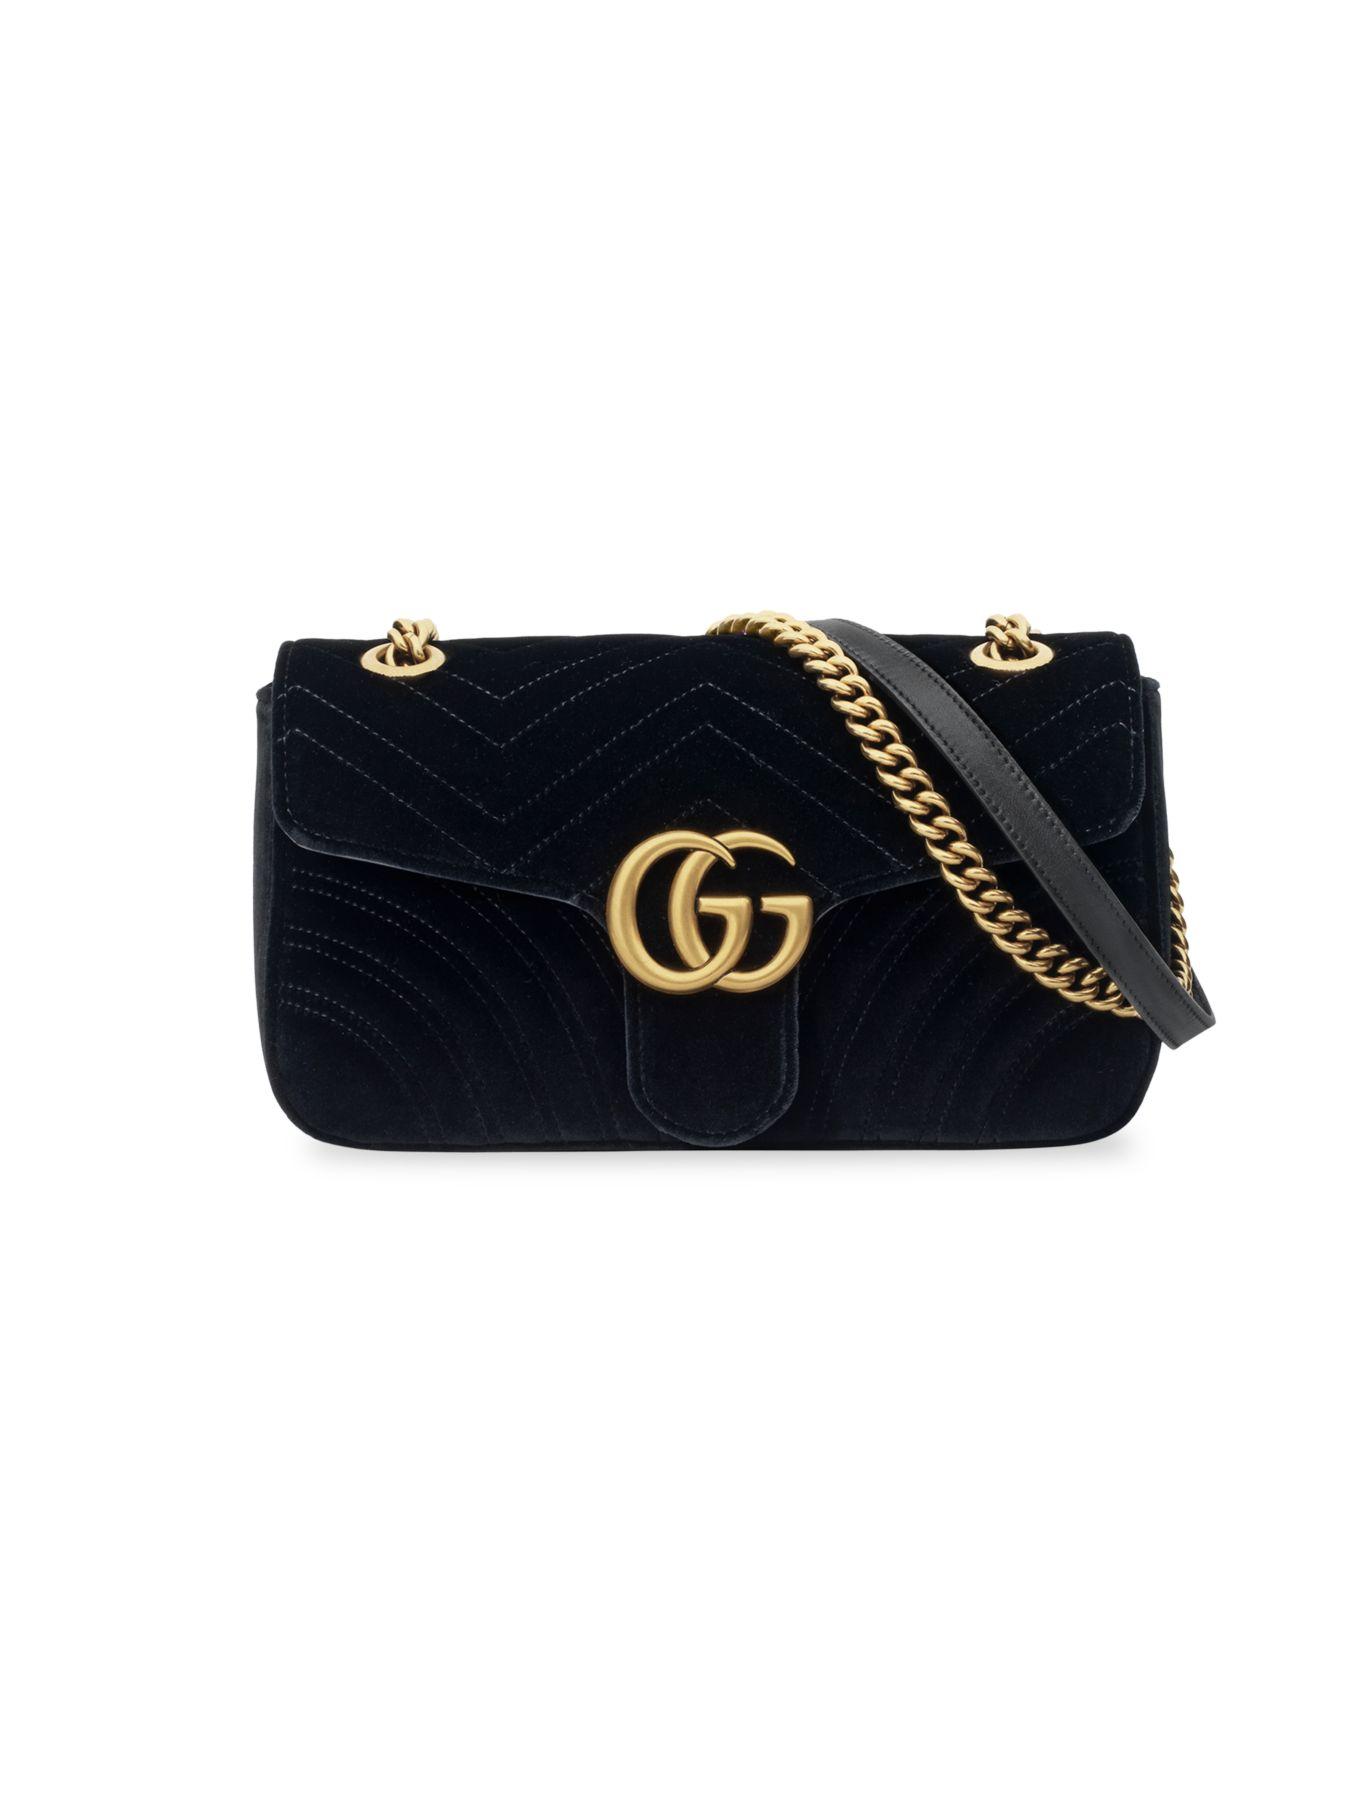 Gucci Marmont GG Black Velvet Large Size – LuxCollector Vintage